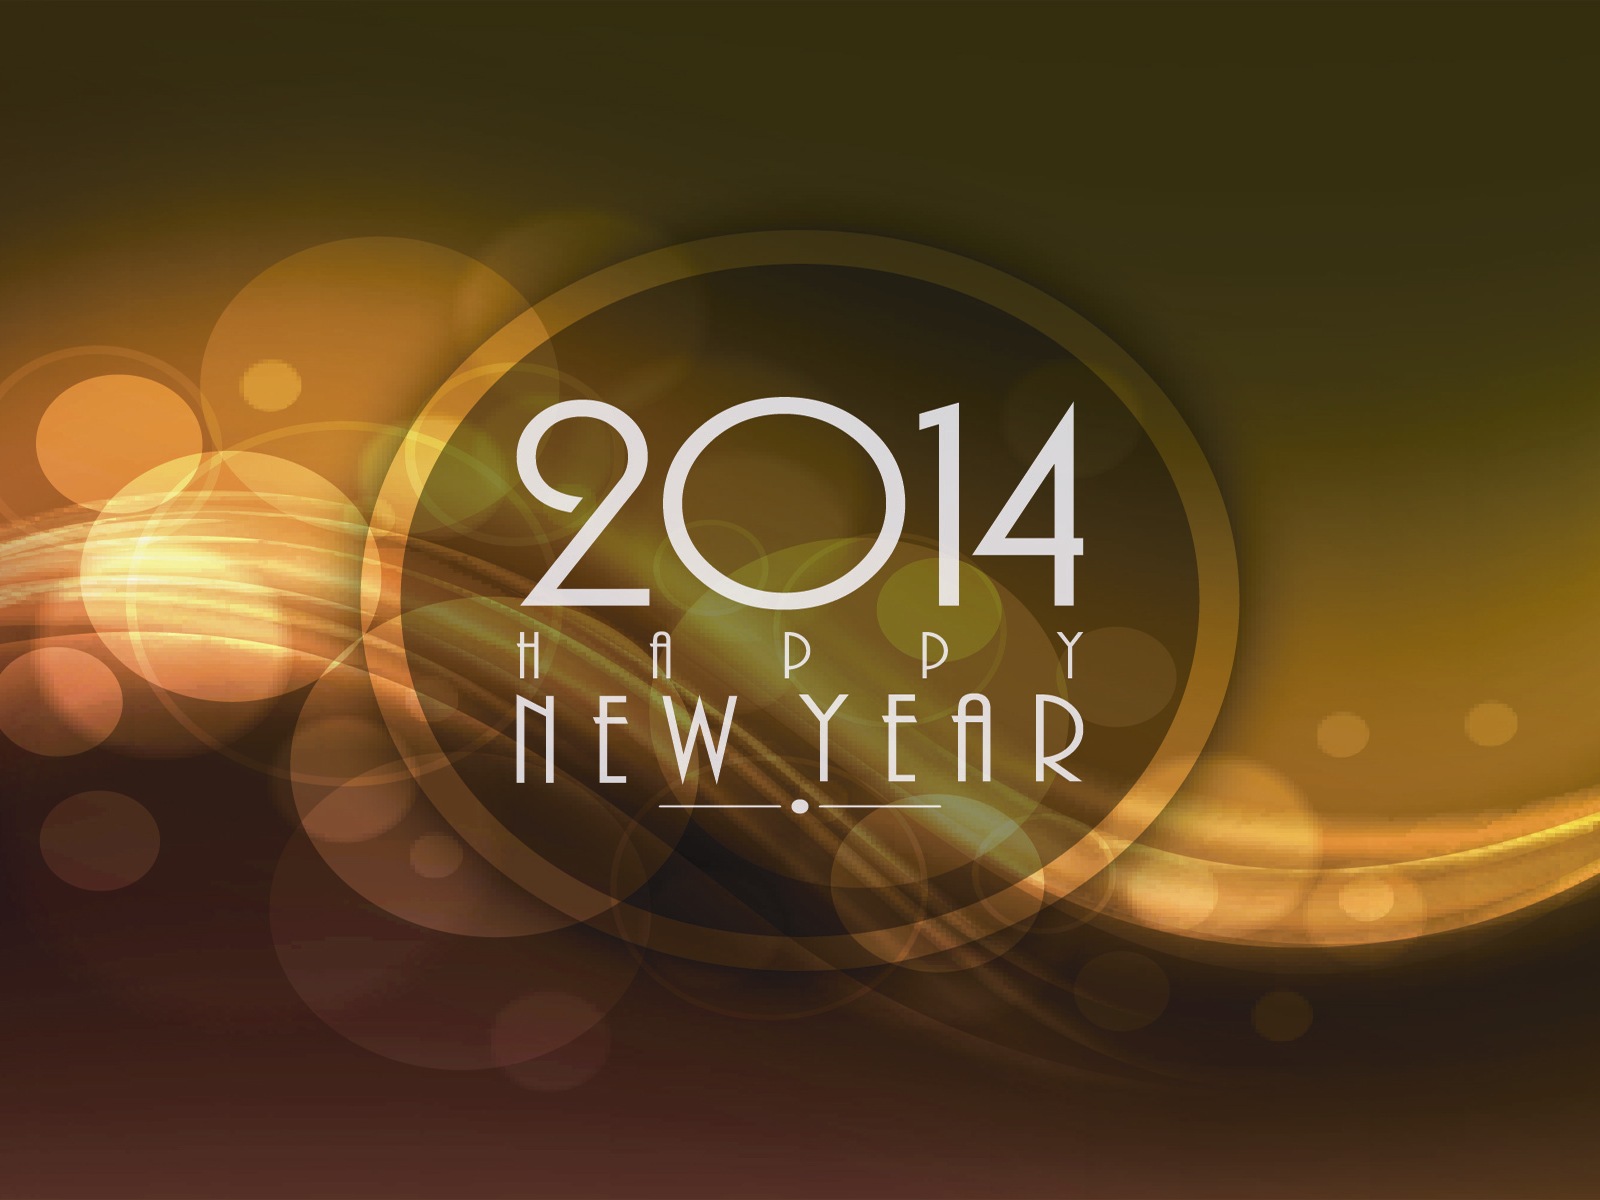 2014 New Year Theme HD Wallpapers (1) #4 - 1600x1200